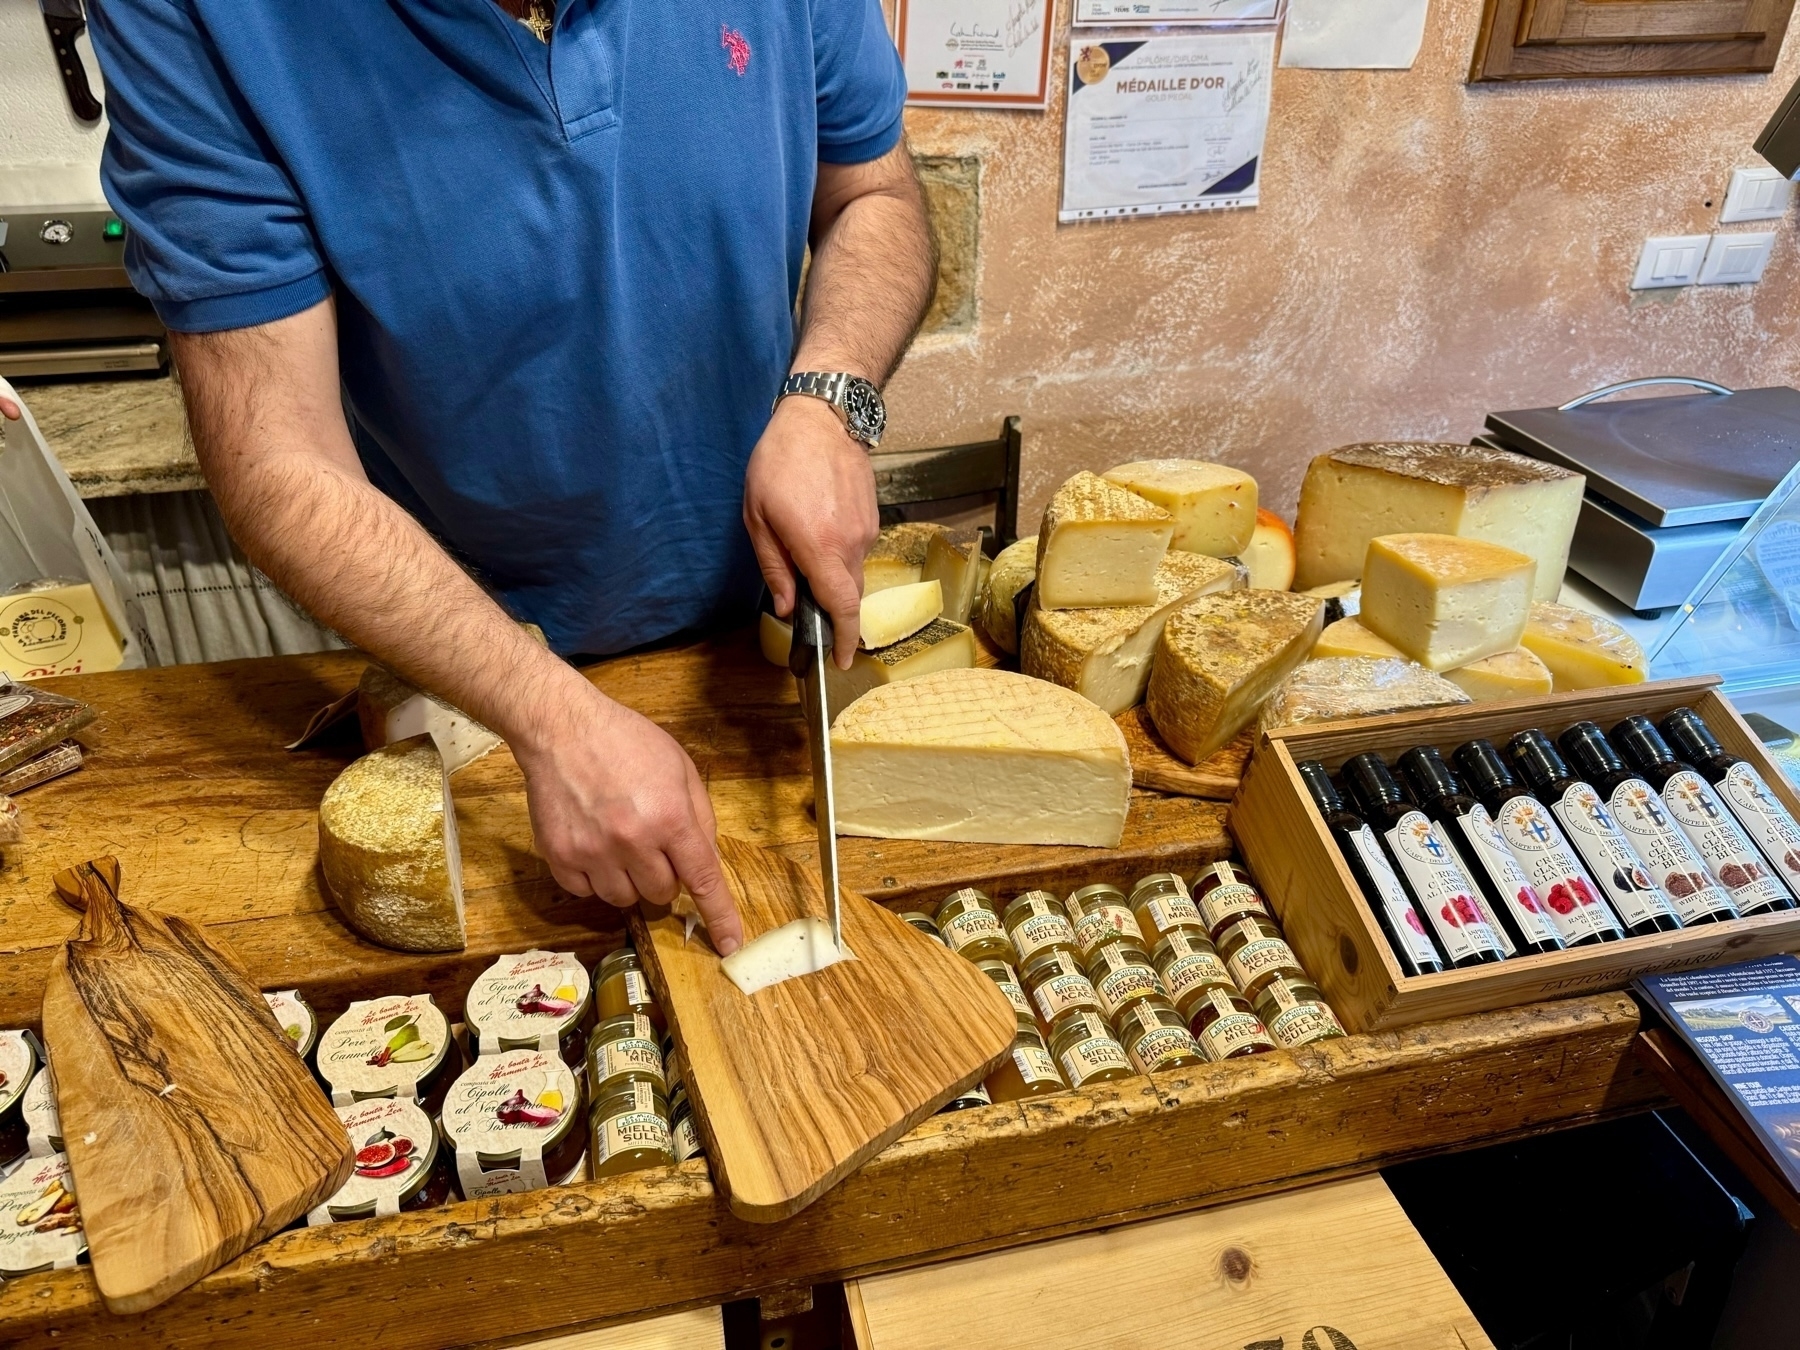 A person in a blue shirt cuts a slice of cheese on a wooden board in a cheese shop. Various types of cheese, small jars of condiments, and bottles of balsamic vinegar are displayed on the wooden counter. 